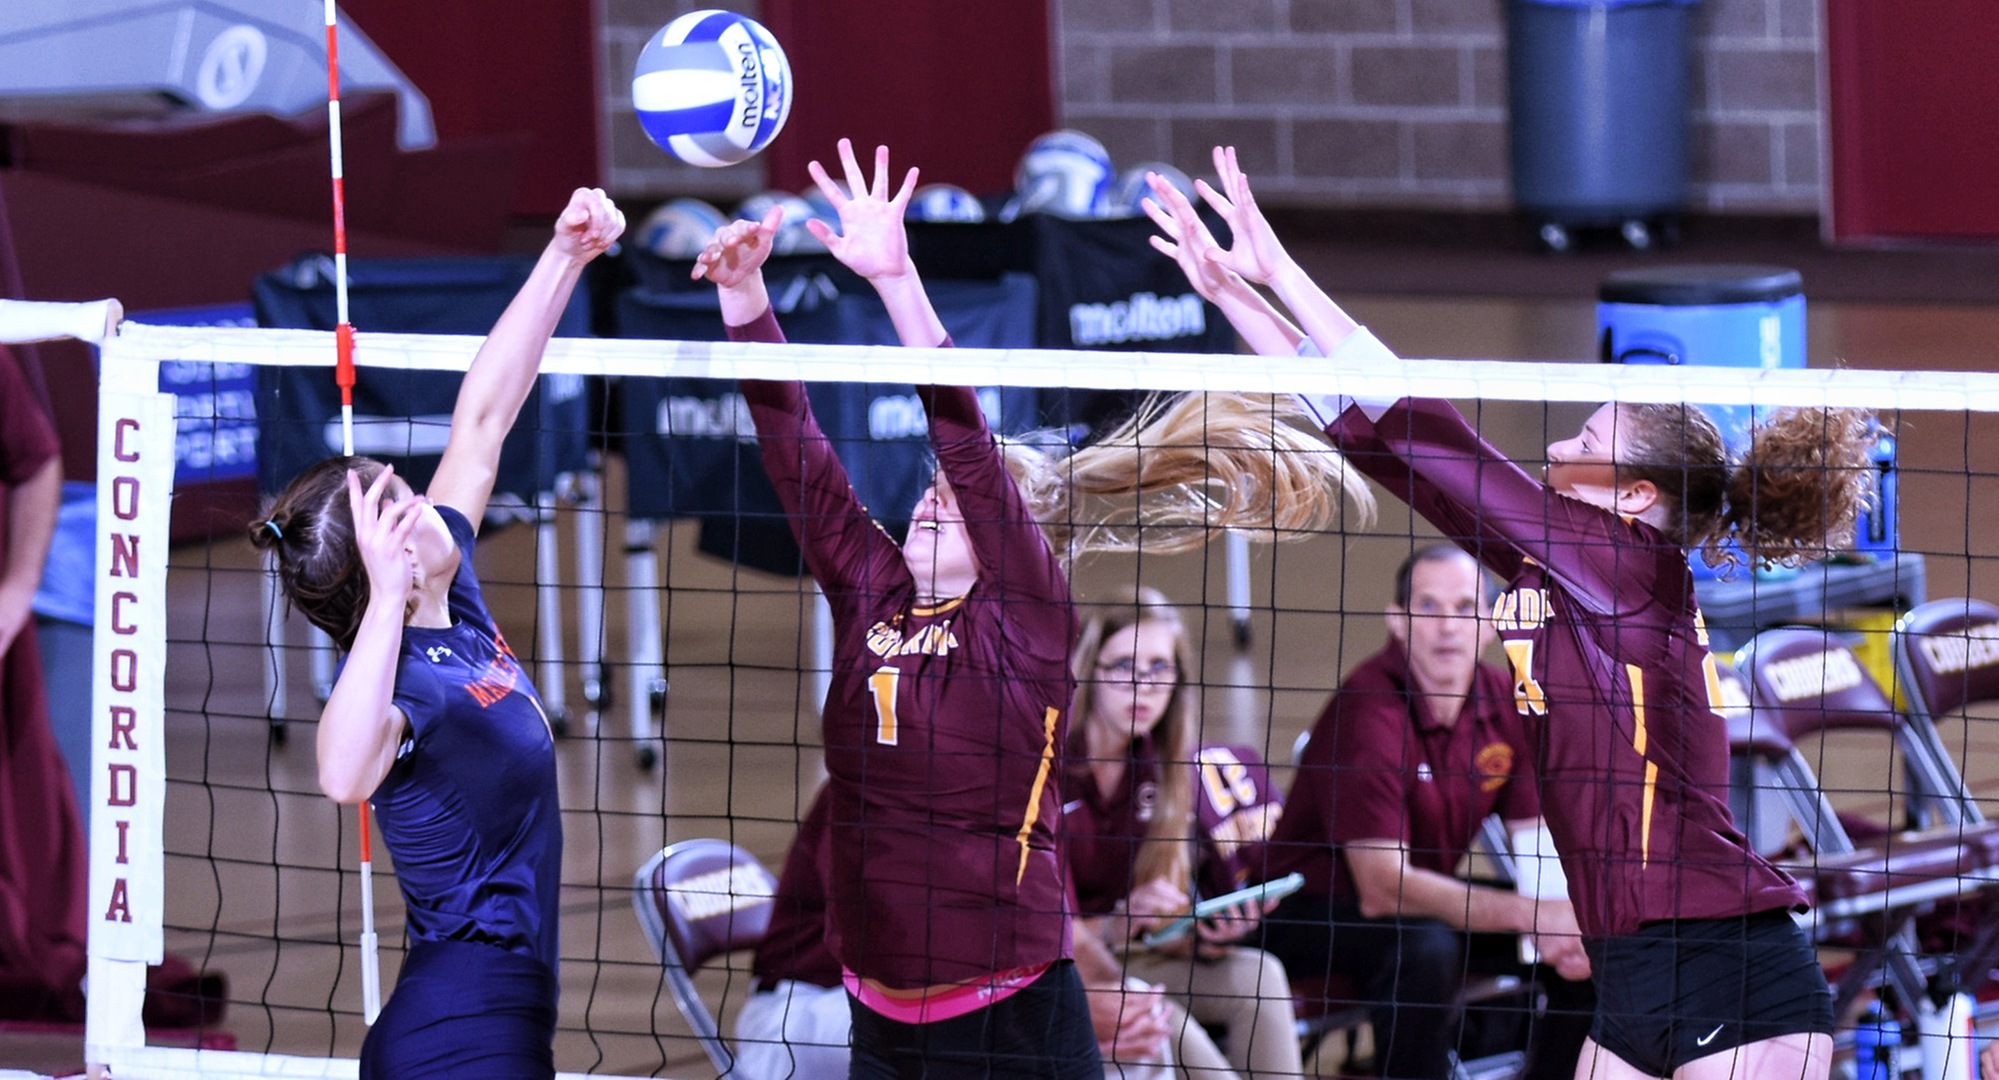 Bailey Gronner (L) and Kendra Wiggs go for the block during the Cobbers' sweep over Macalester.